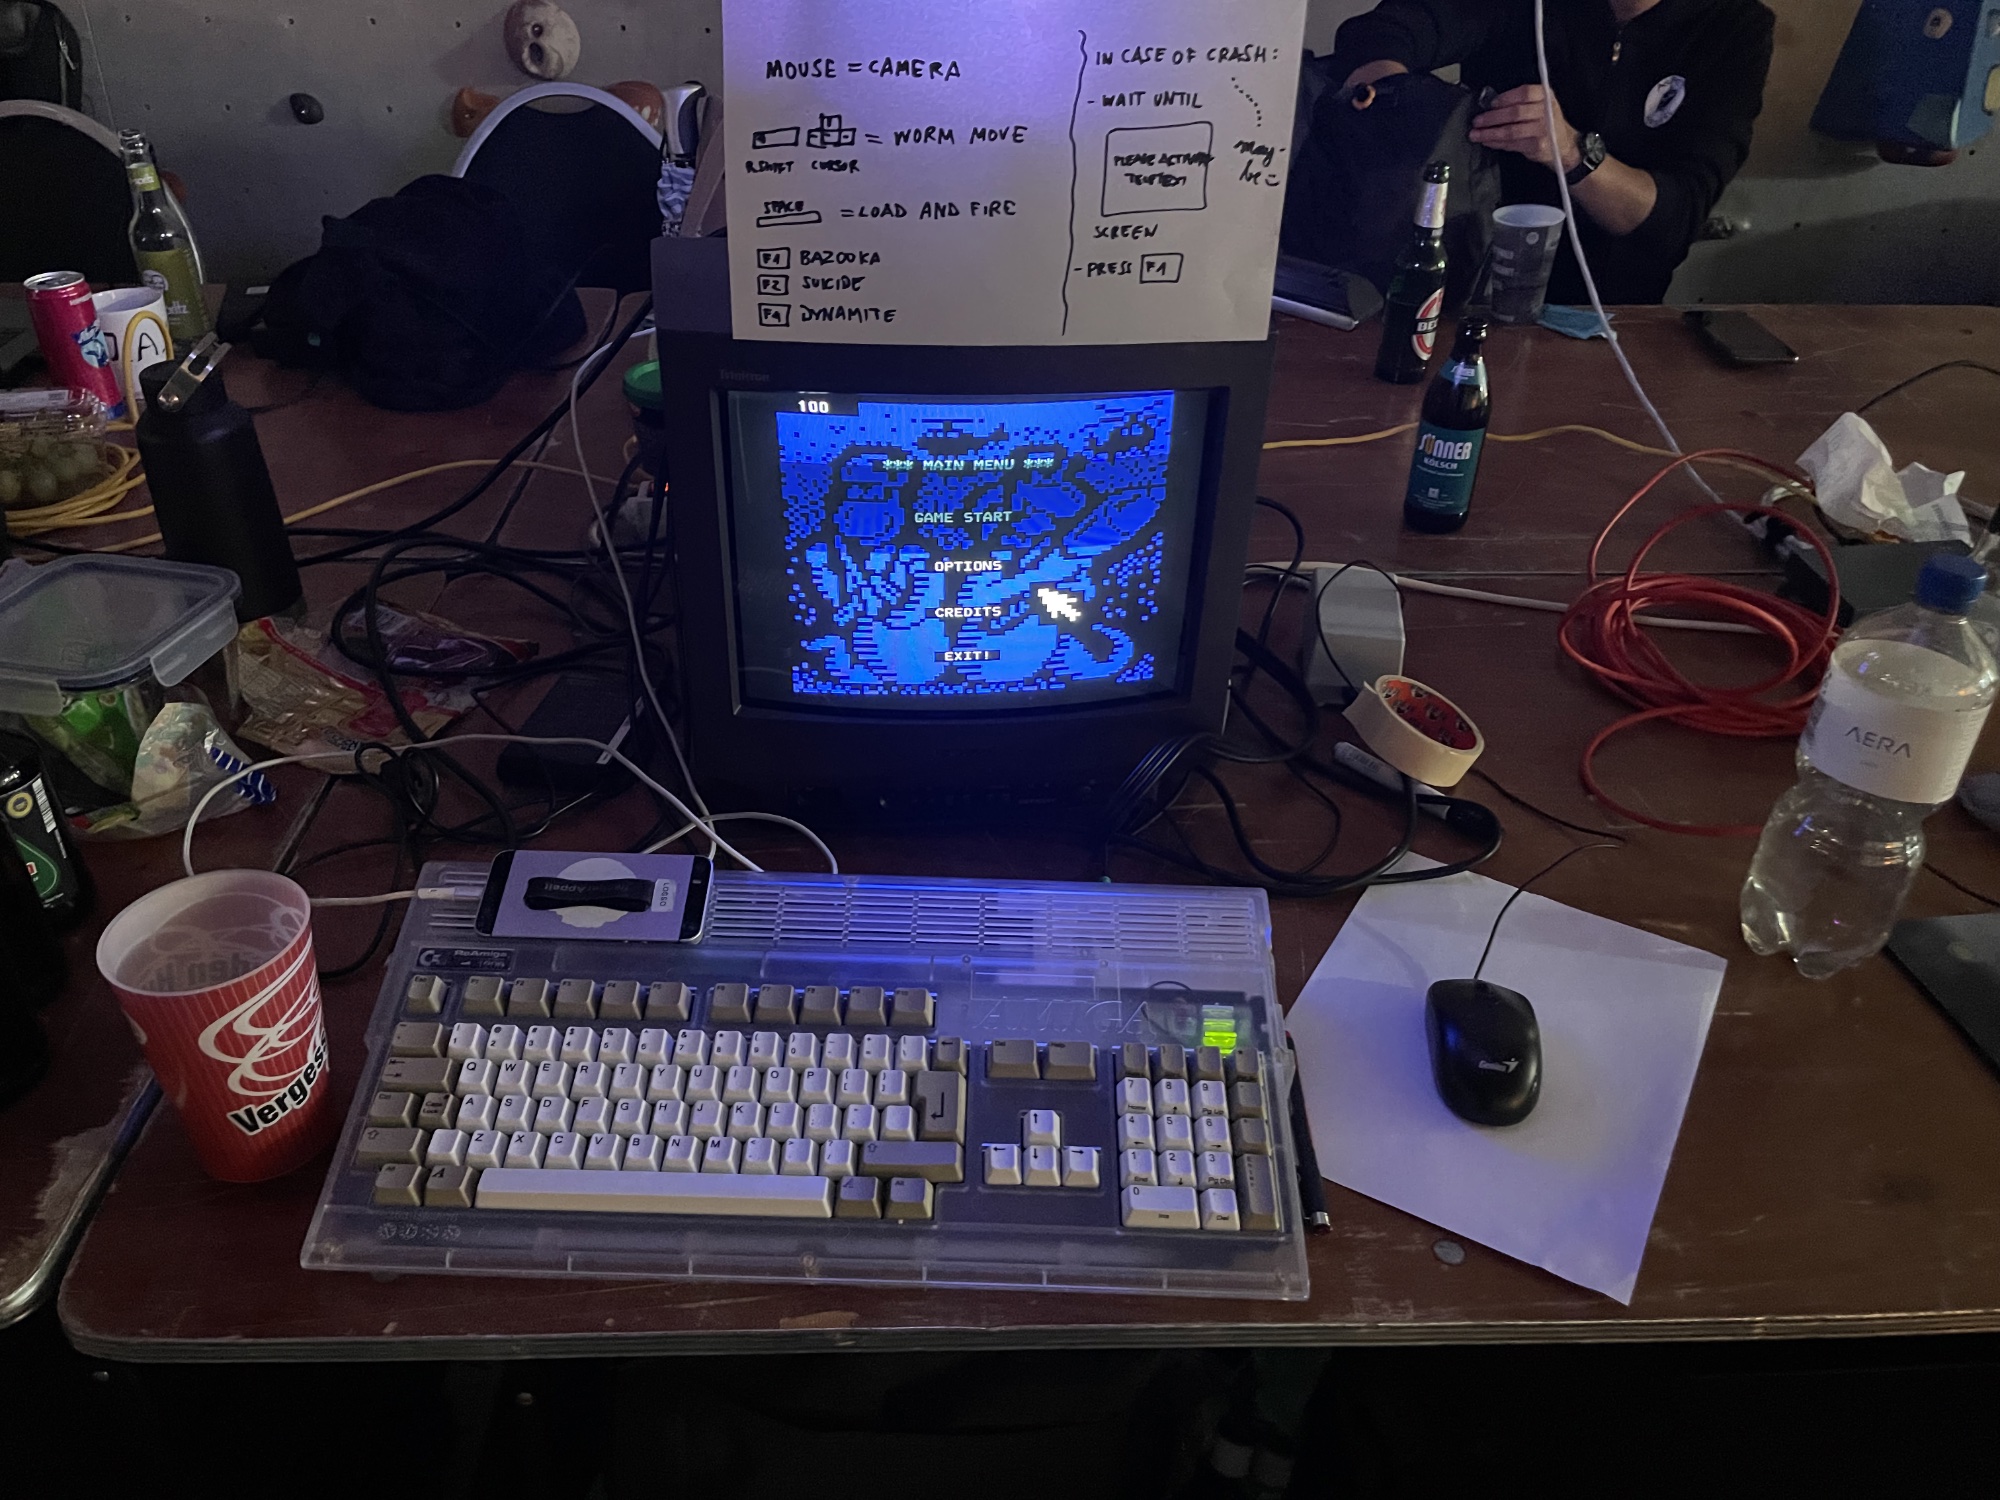 An Amiga 1200 running the Teletext feed of the Worms game